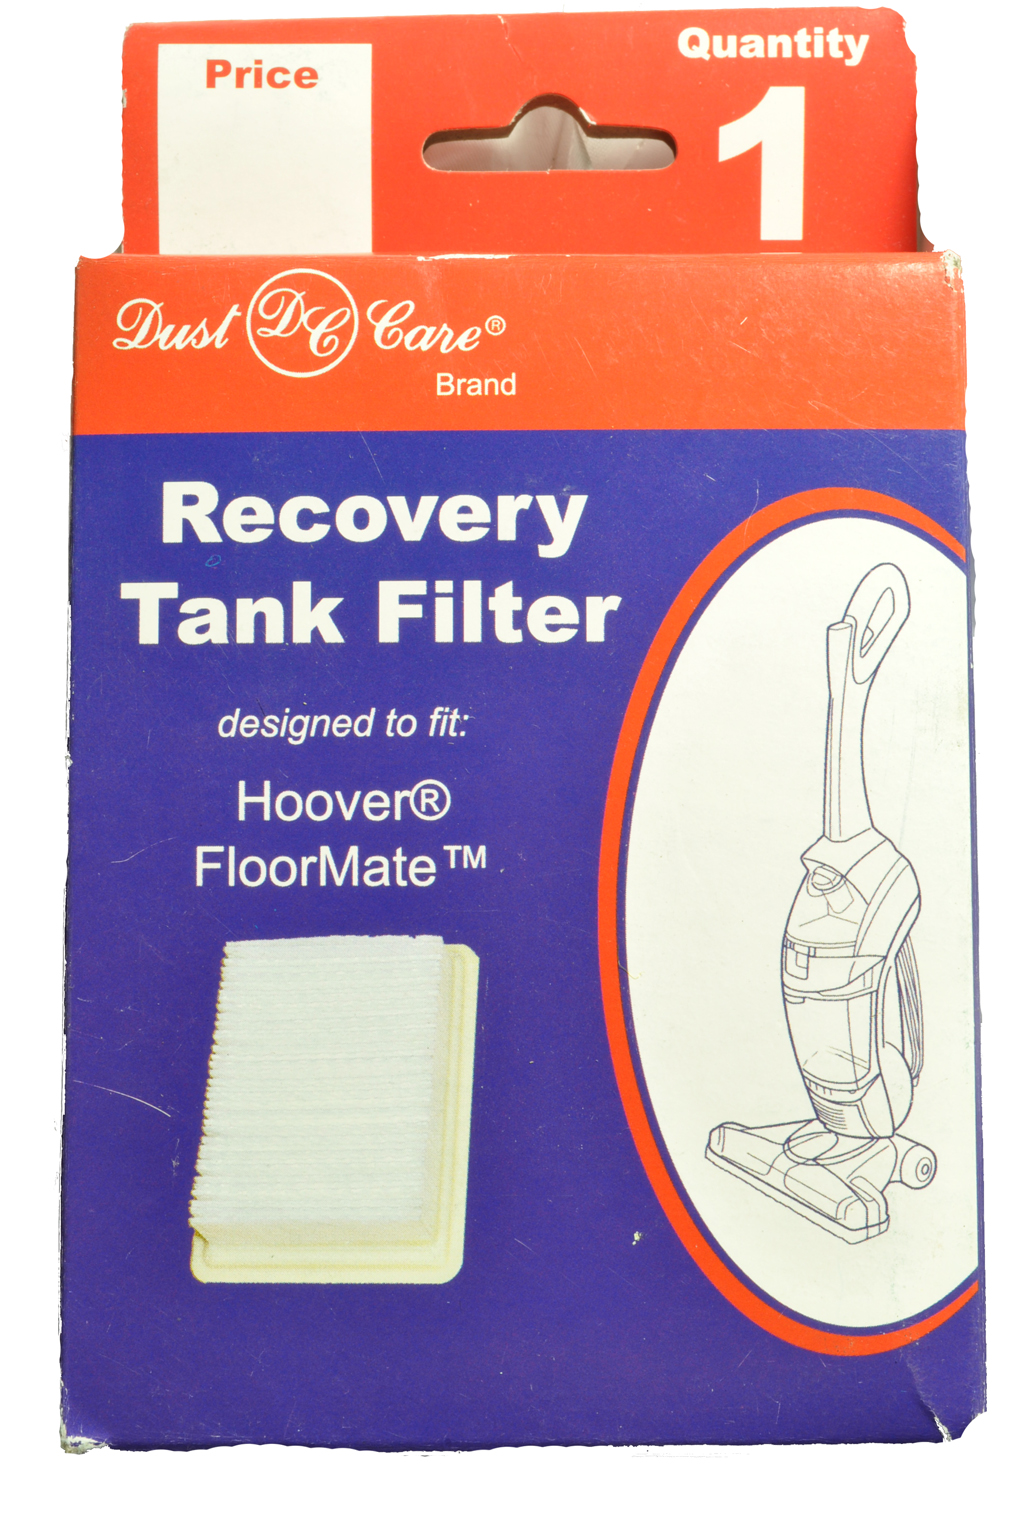 Hoover Floormate 3000/3030 Recover Tank Filter, Dust Care, designed to fit Hoover Floor Mate Floormate Recover Tank Filter